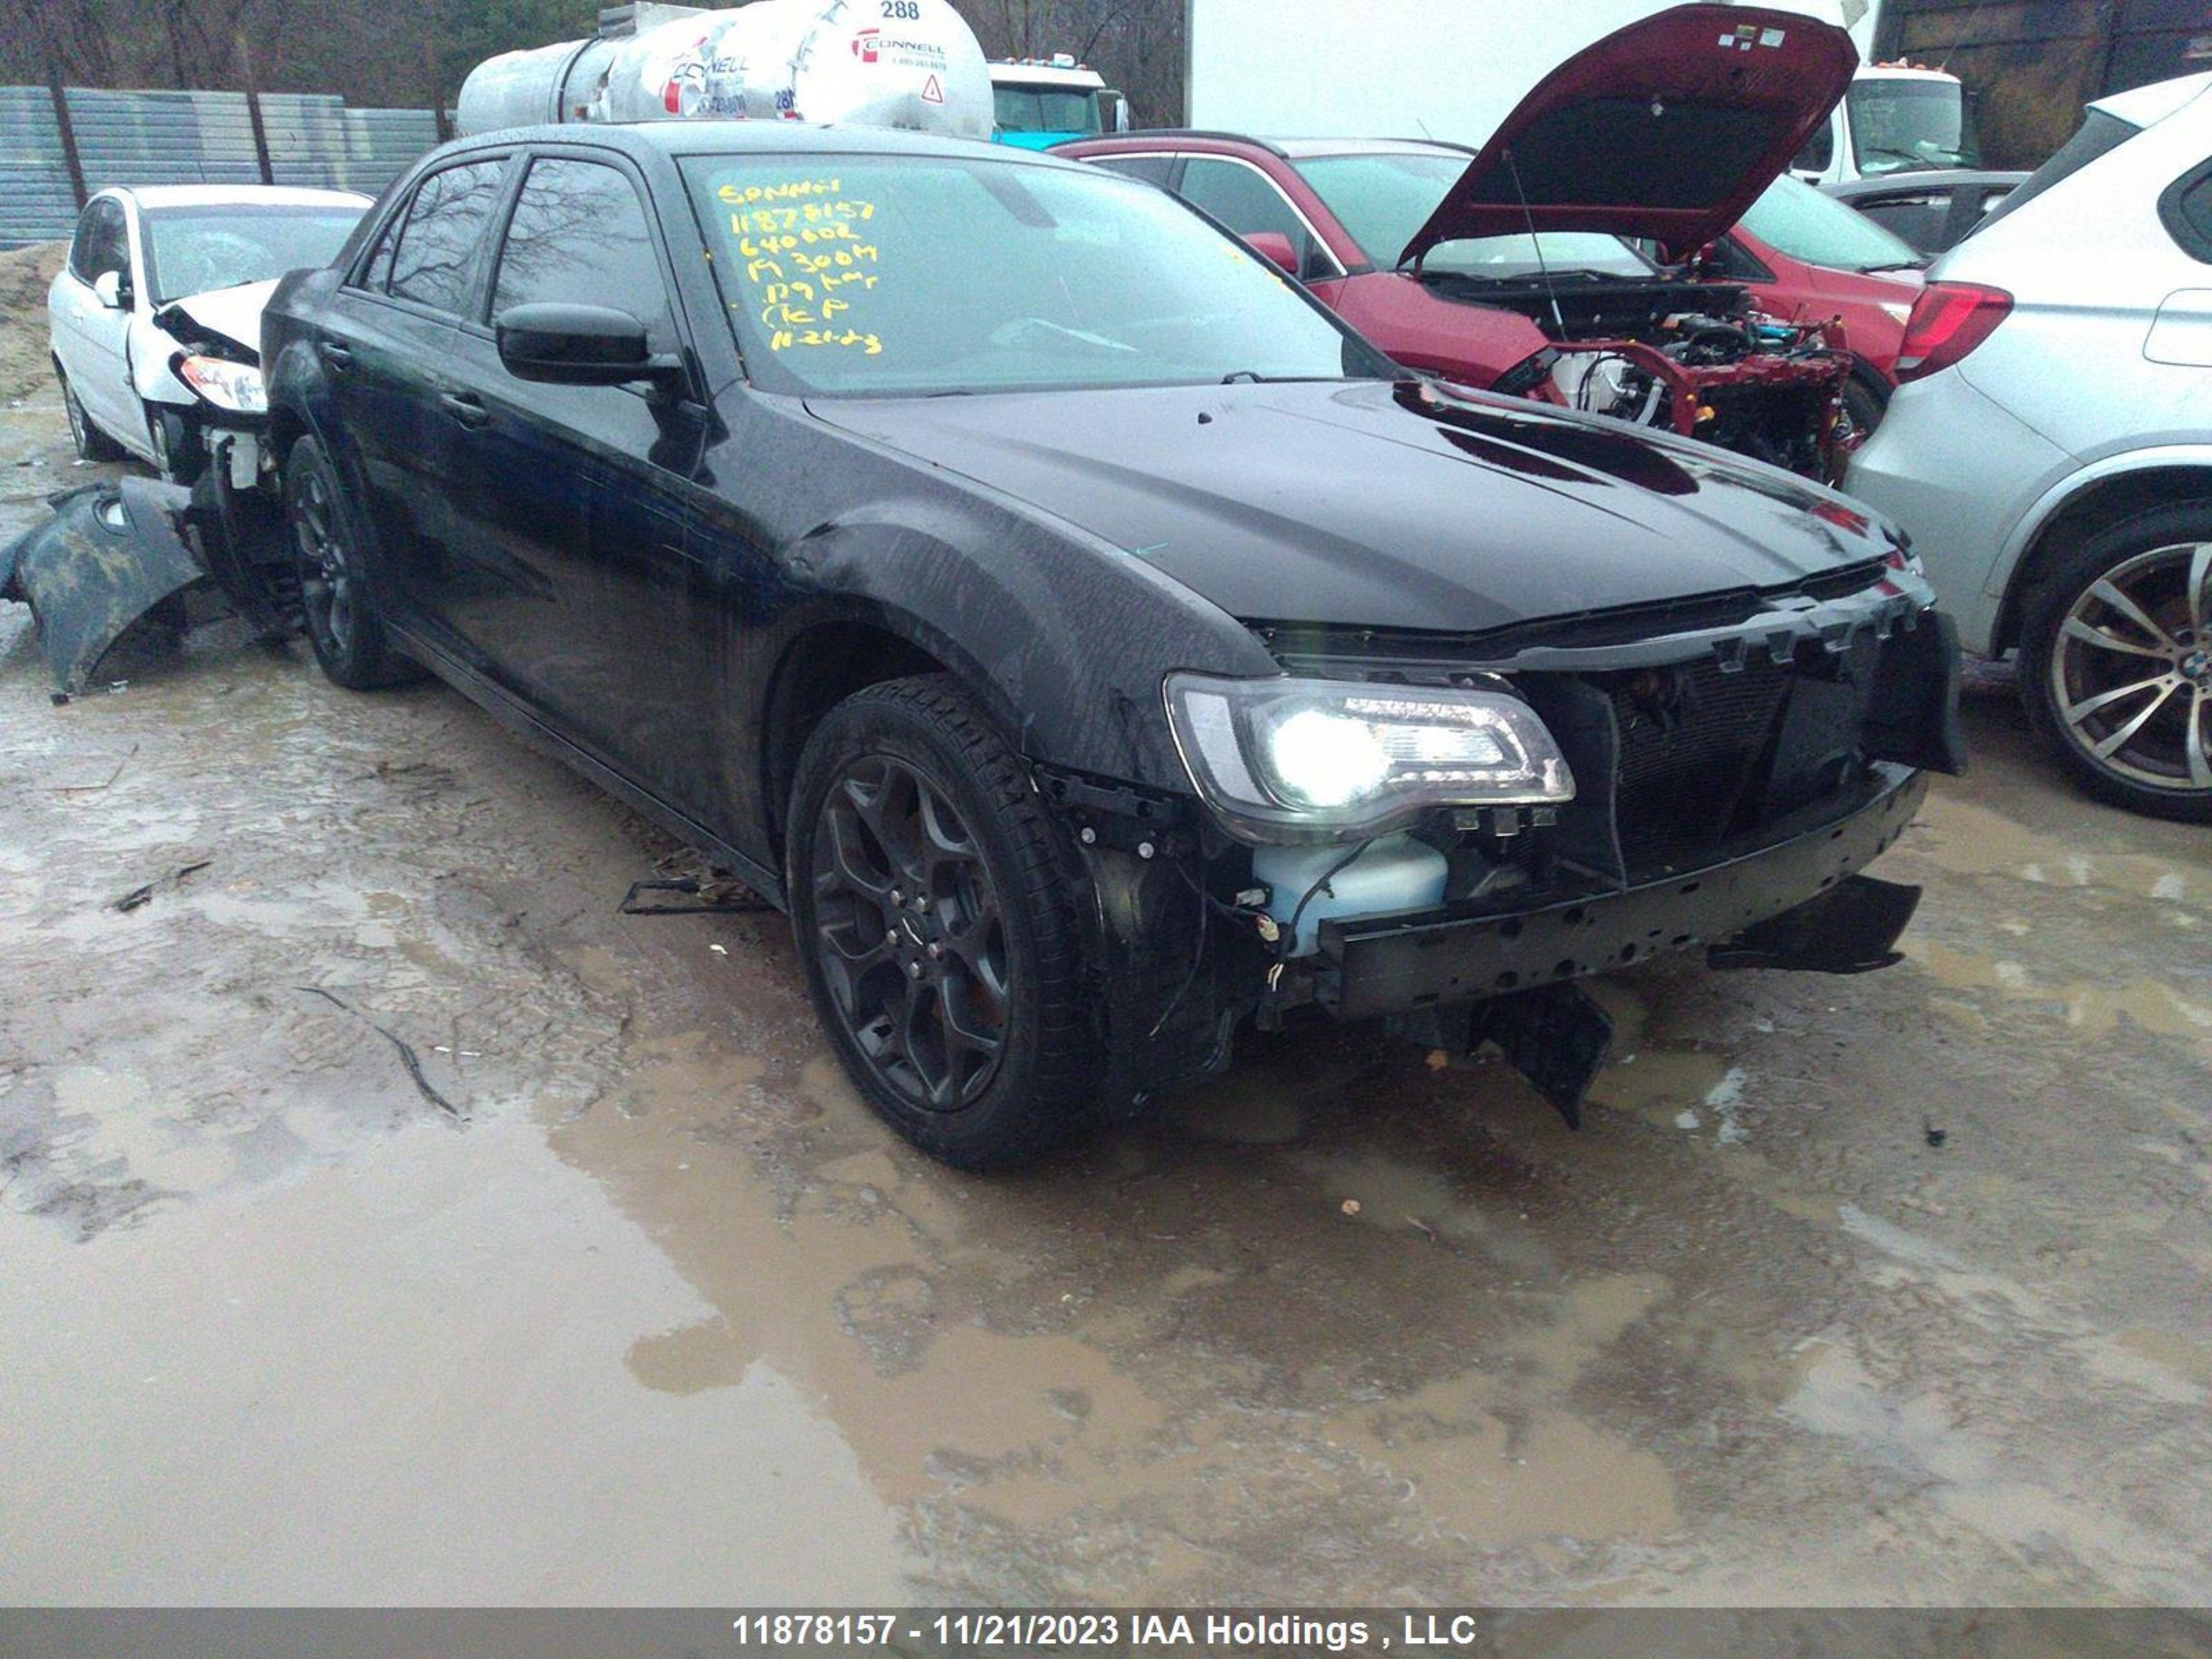 vin: 2C3CCAGG4KH640602 2C3CCAGG4KH640602 2019 chrysler 300 3600 for Sale in l4a7x4, 16505 Hwy 48 , Stouffville, Ontario, USA